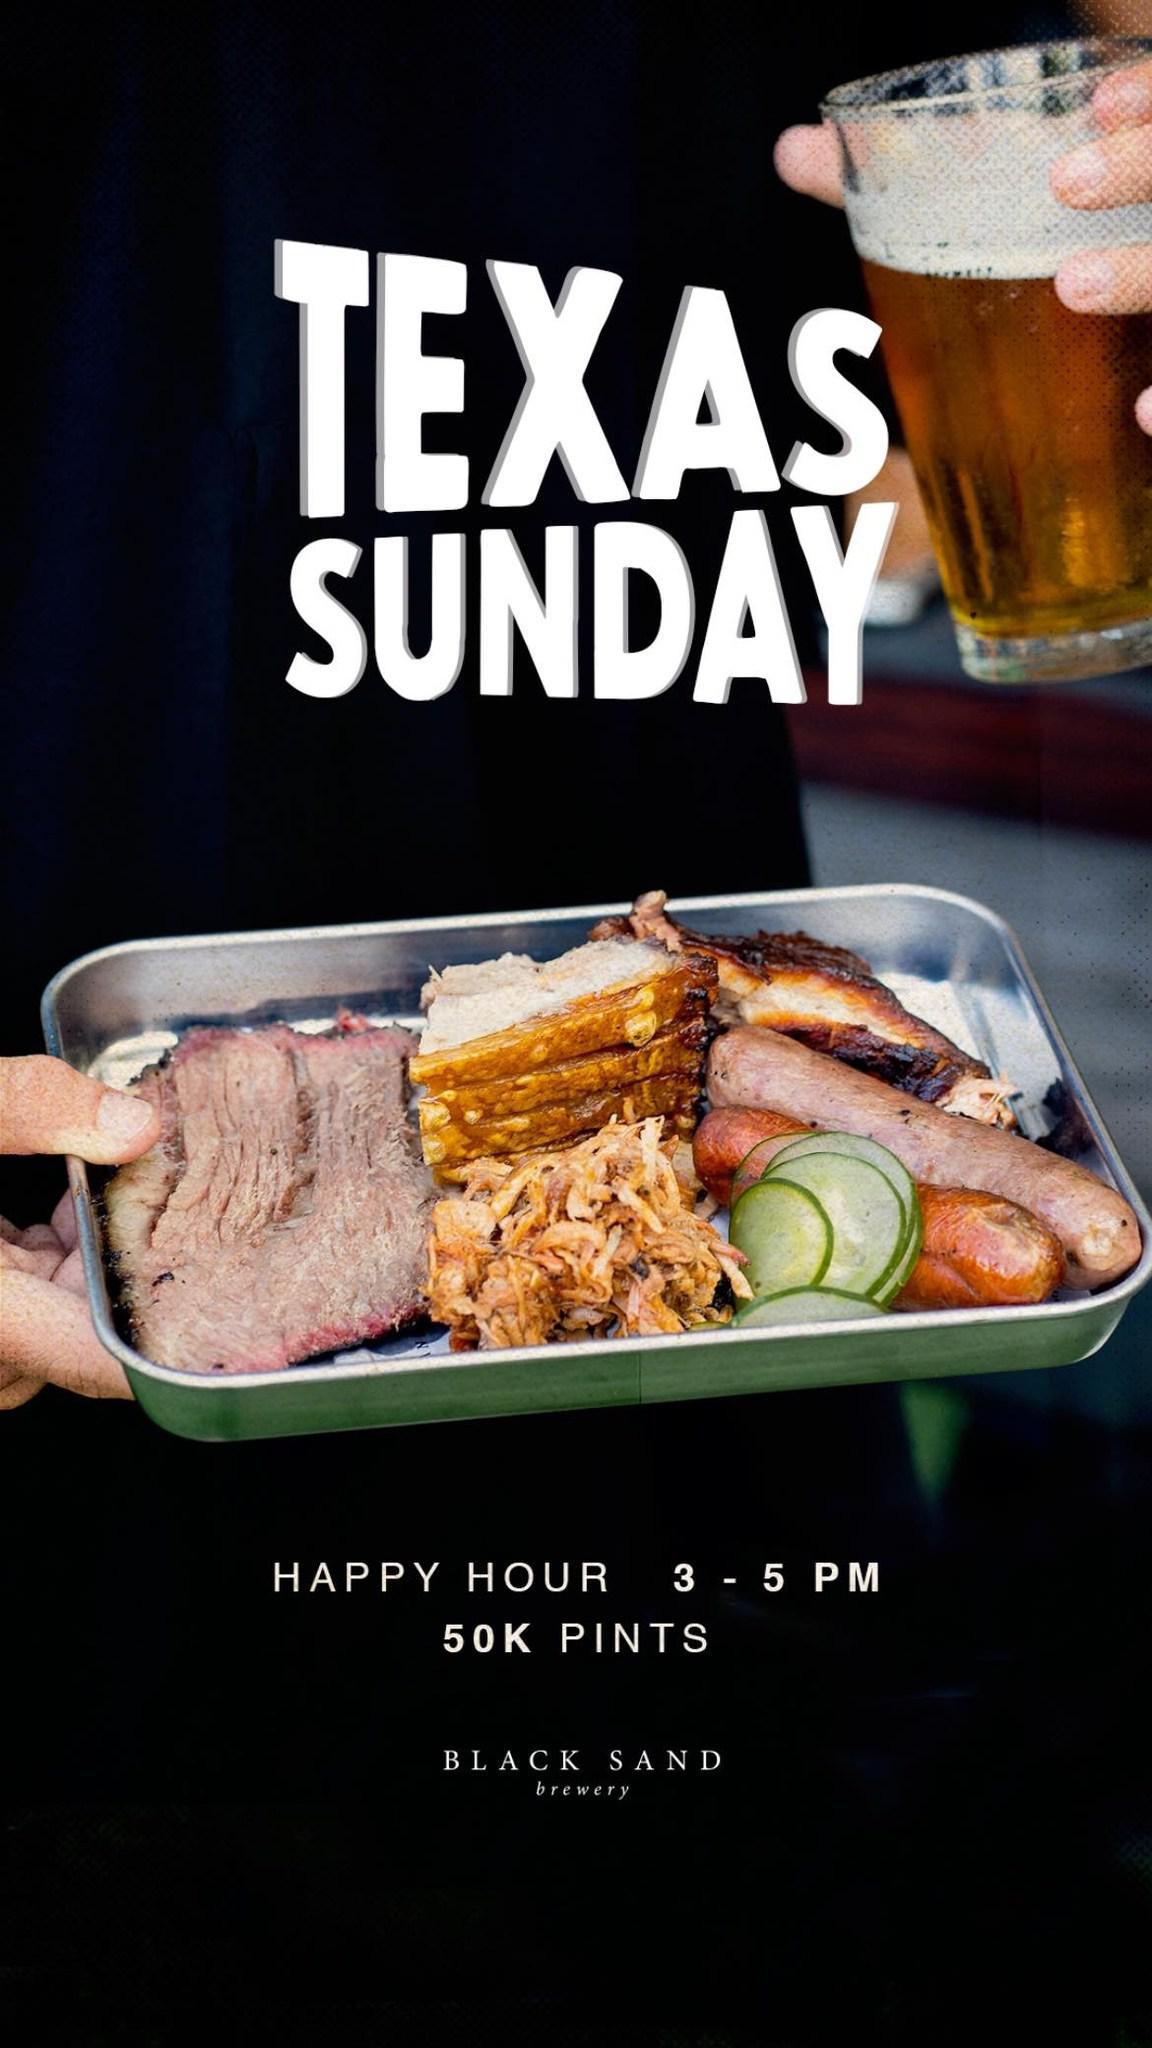 Texas Sunday Happy Hour at Black Sand Brewery, 3-5pm